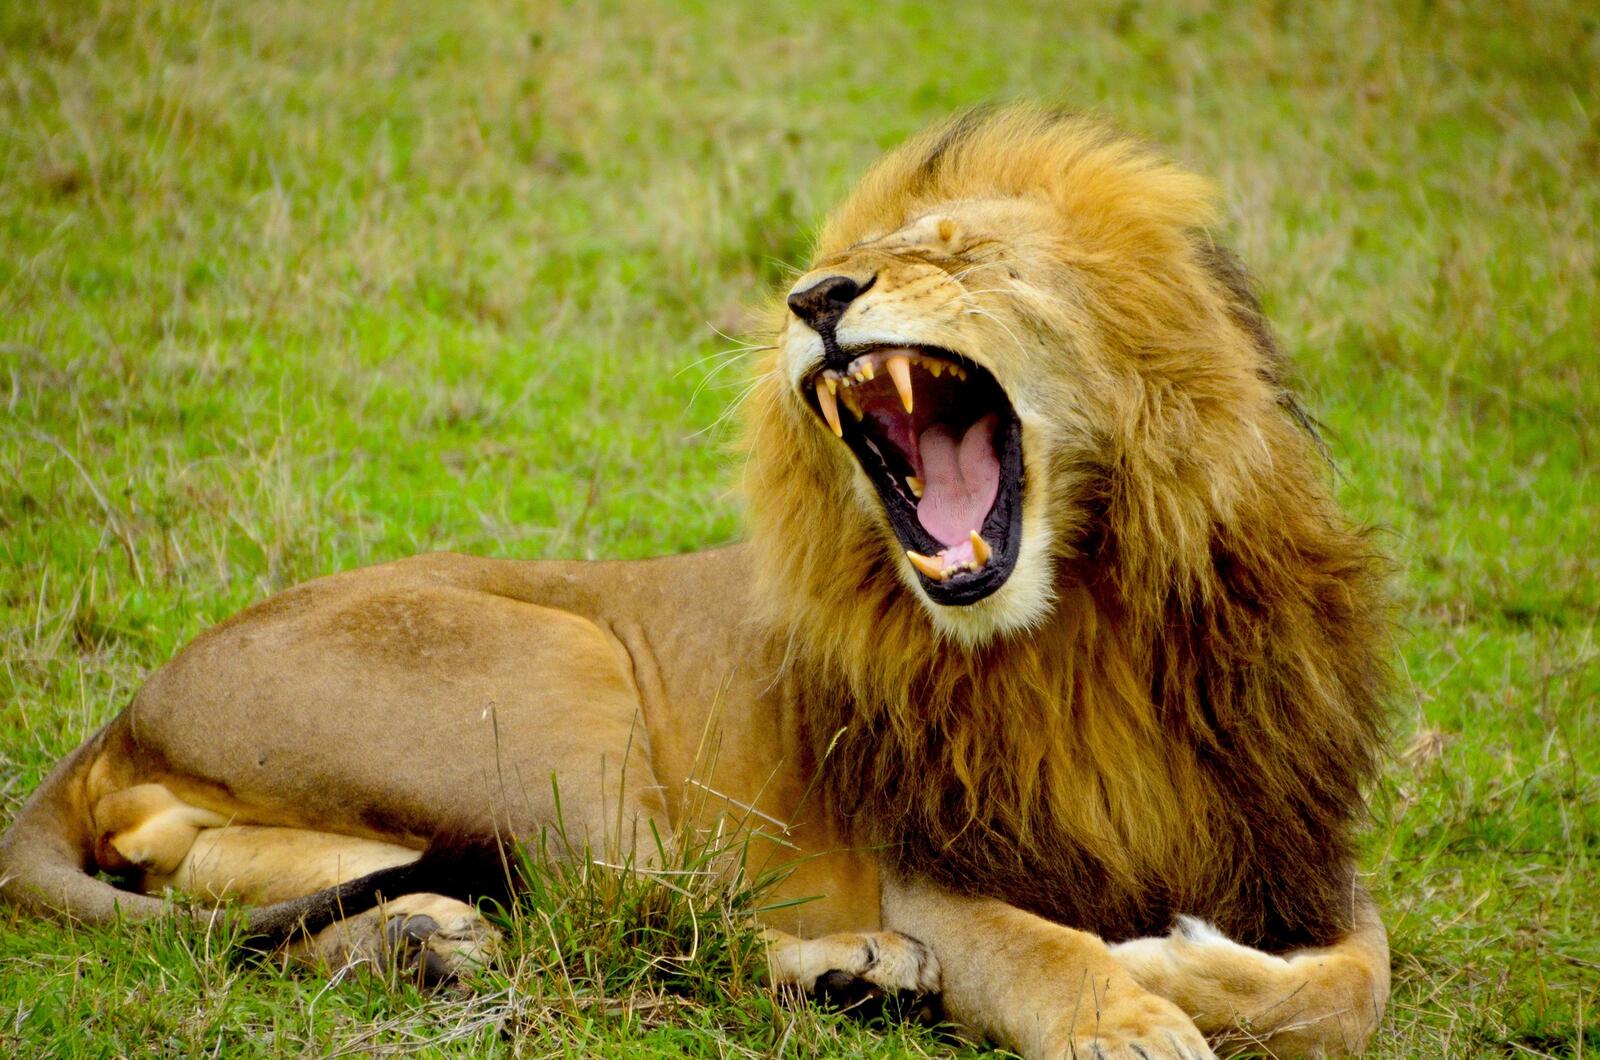 Free photo The lion yawns lying on the green grass.